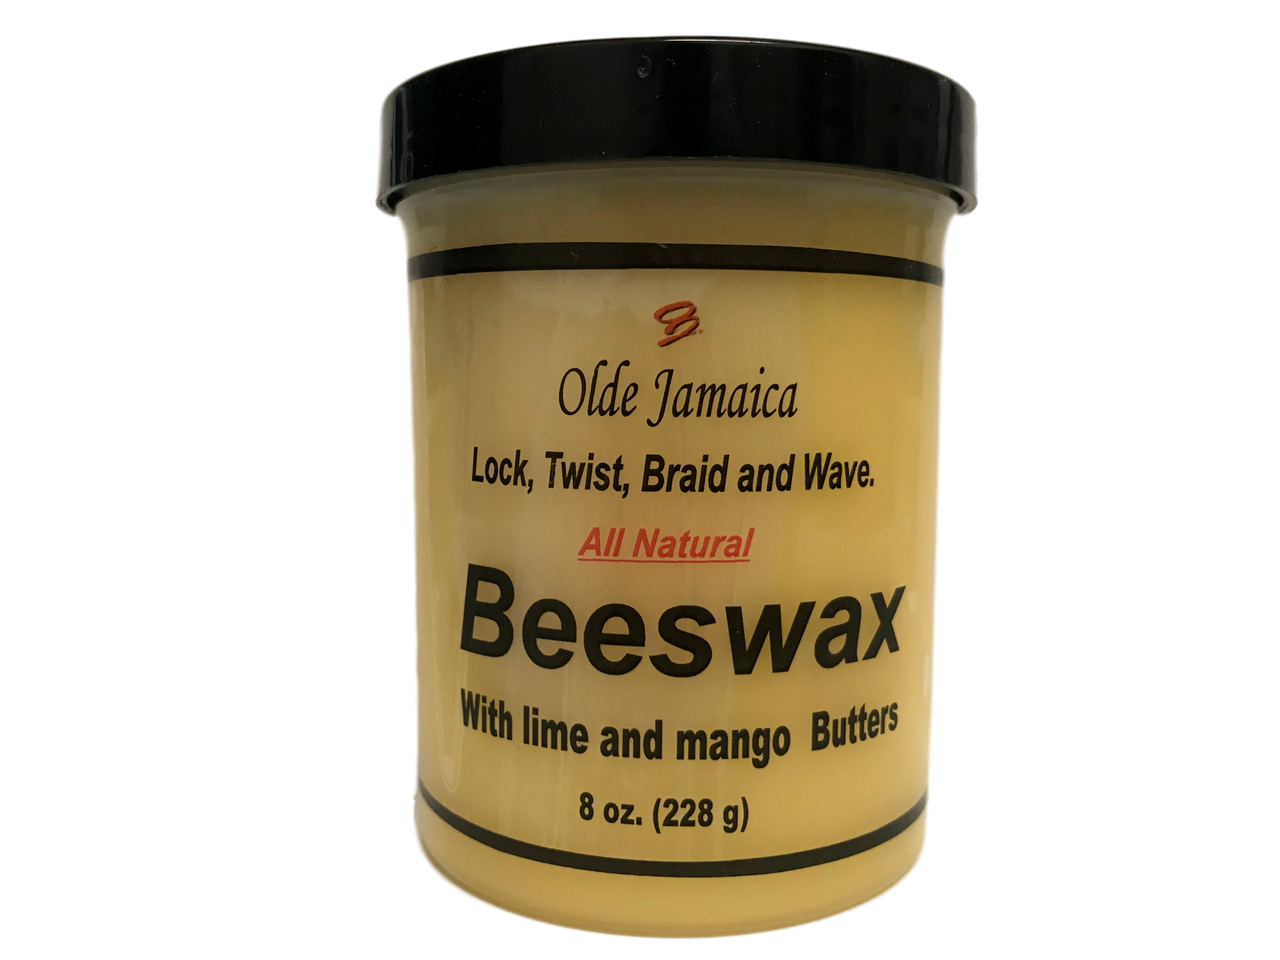 All-Natural Beeswax by Olde Jamaica | No Synthetic Gums or Polymers!